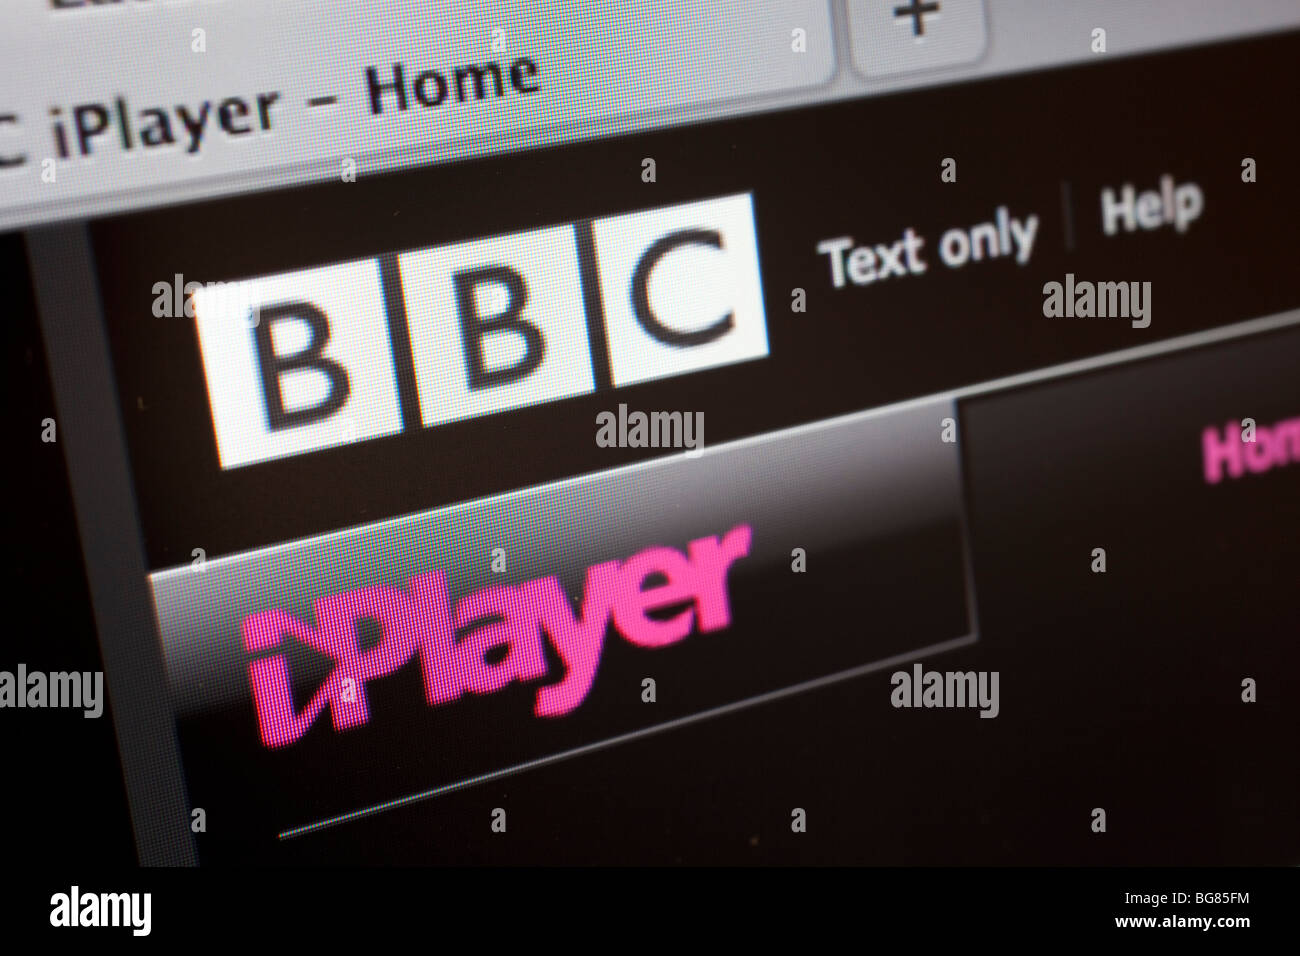 Computer screen showing the website for BBC i Player tv service Stock Photo